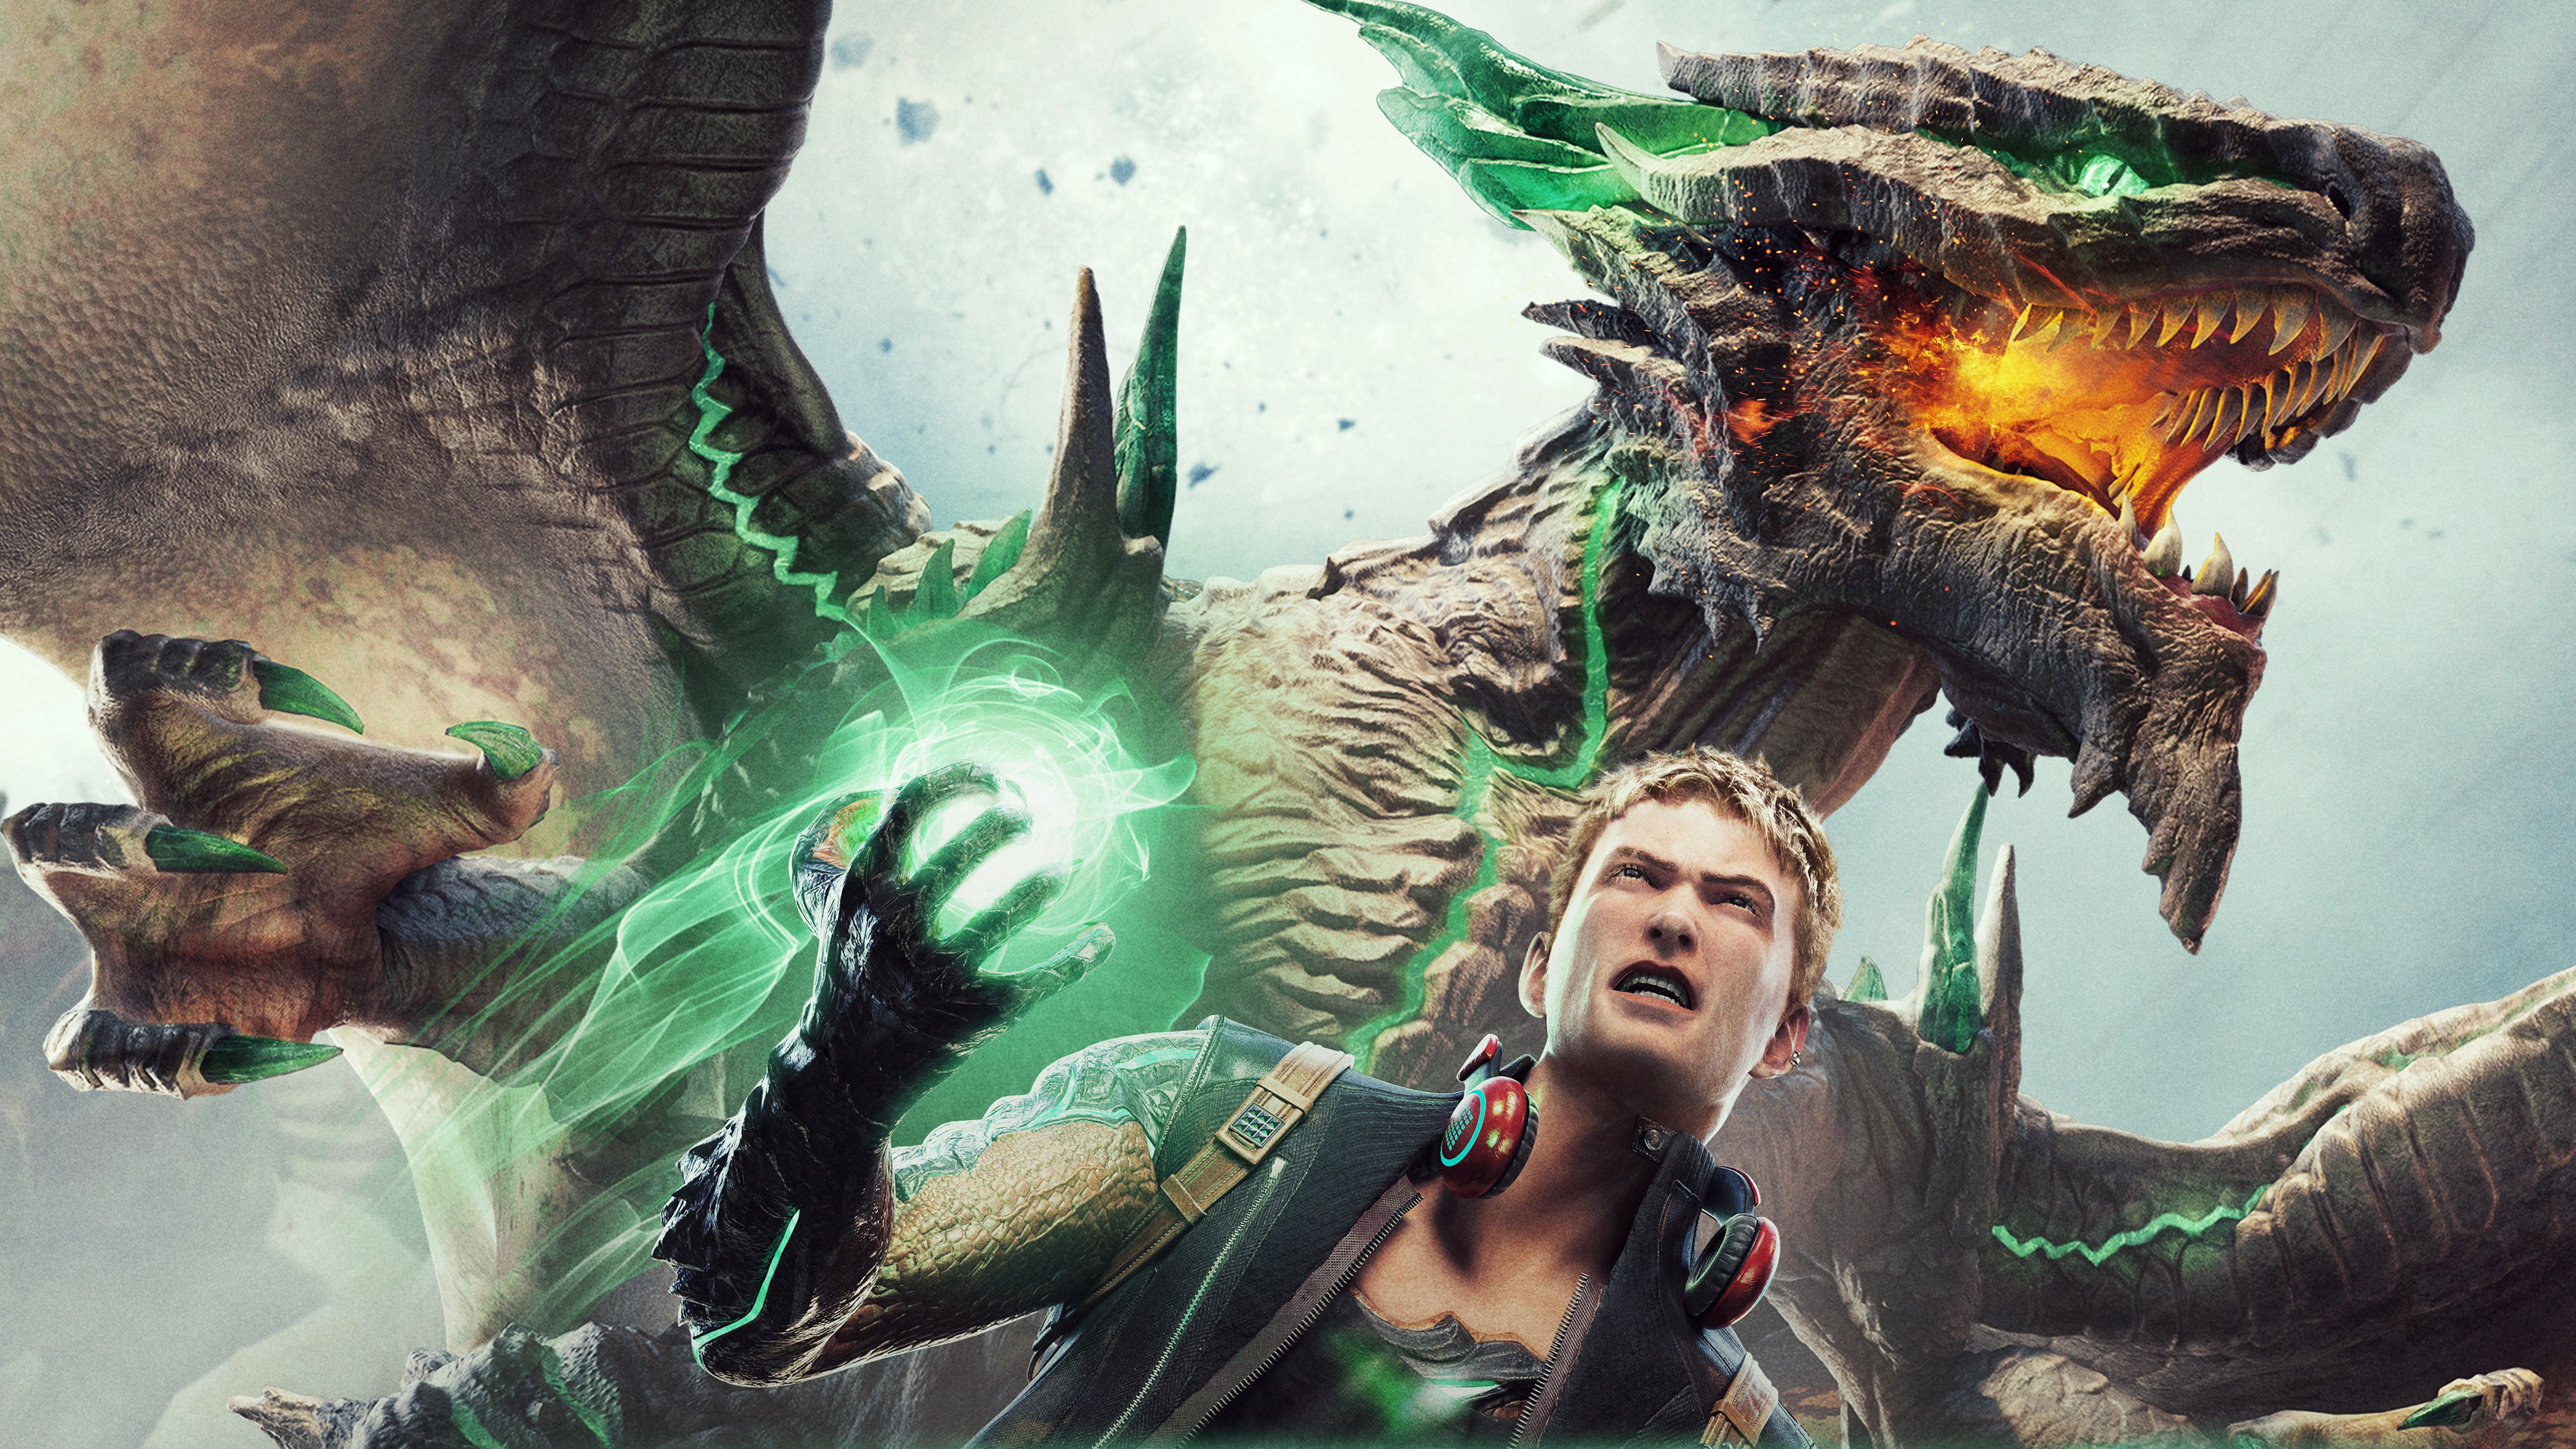 Video Game Scalebound HD Wallpaper | Background Image